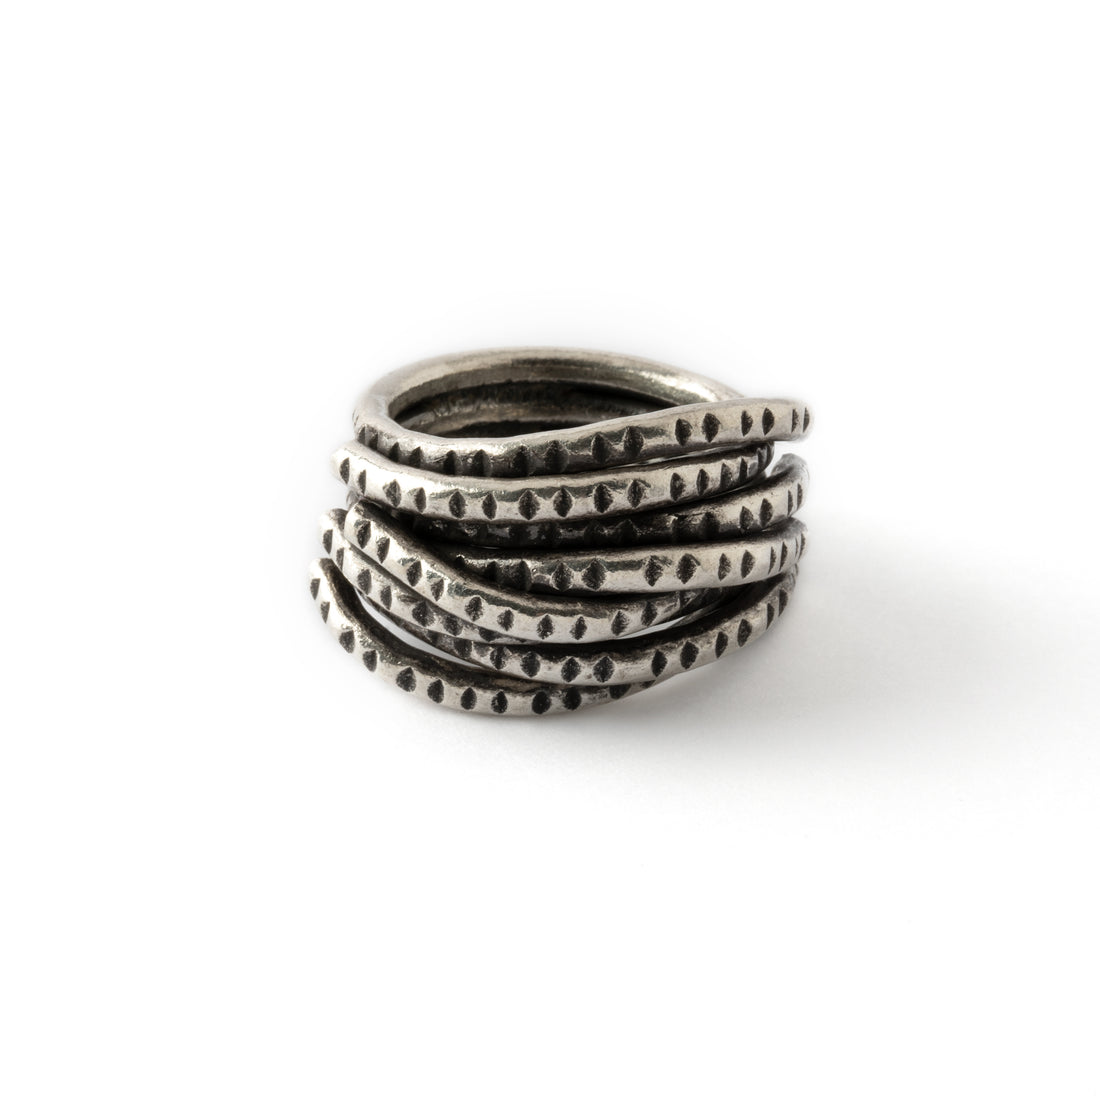 95% tribal silver chunky ring with layered design frontal view